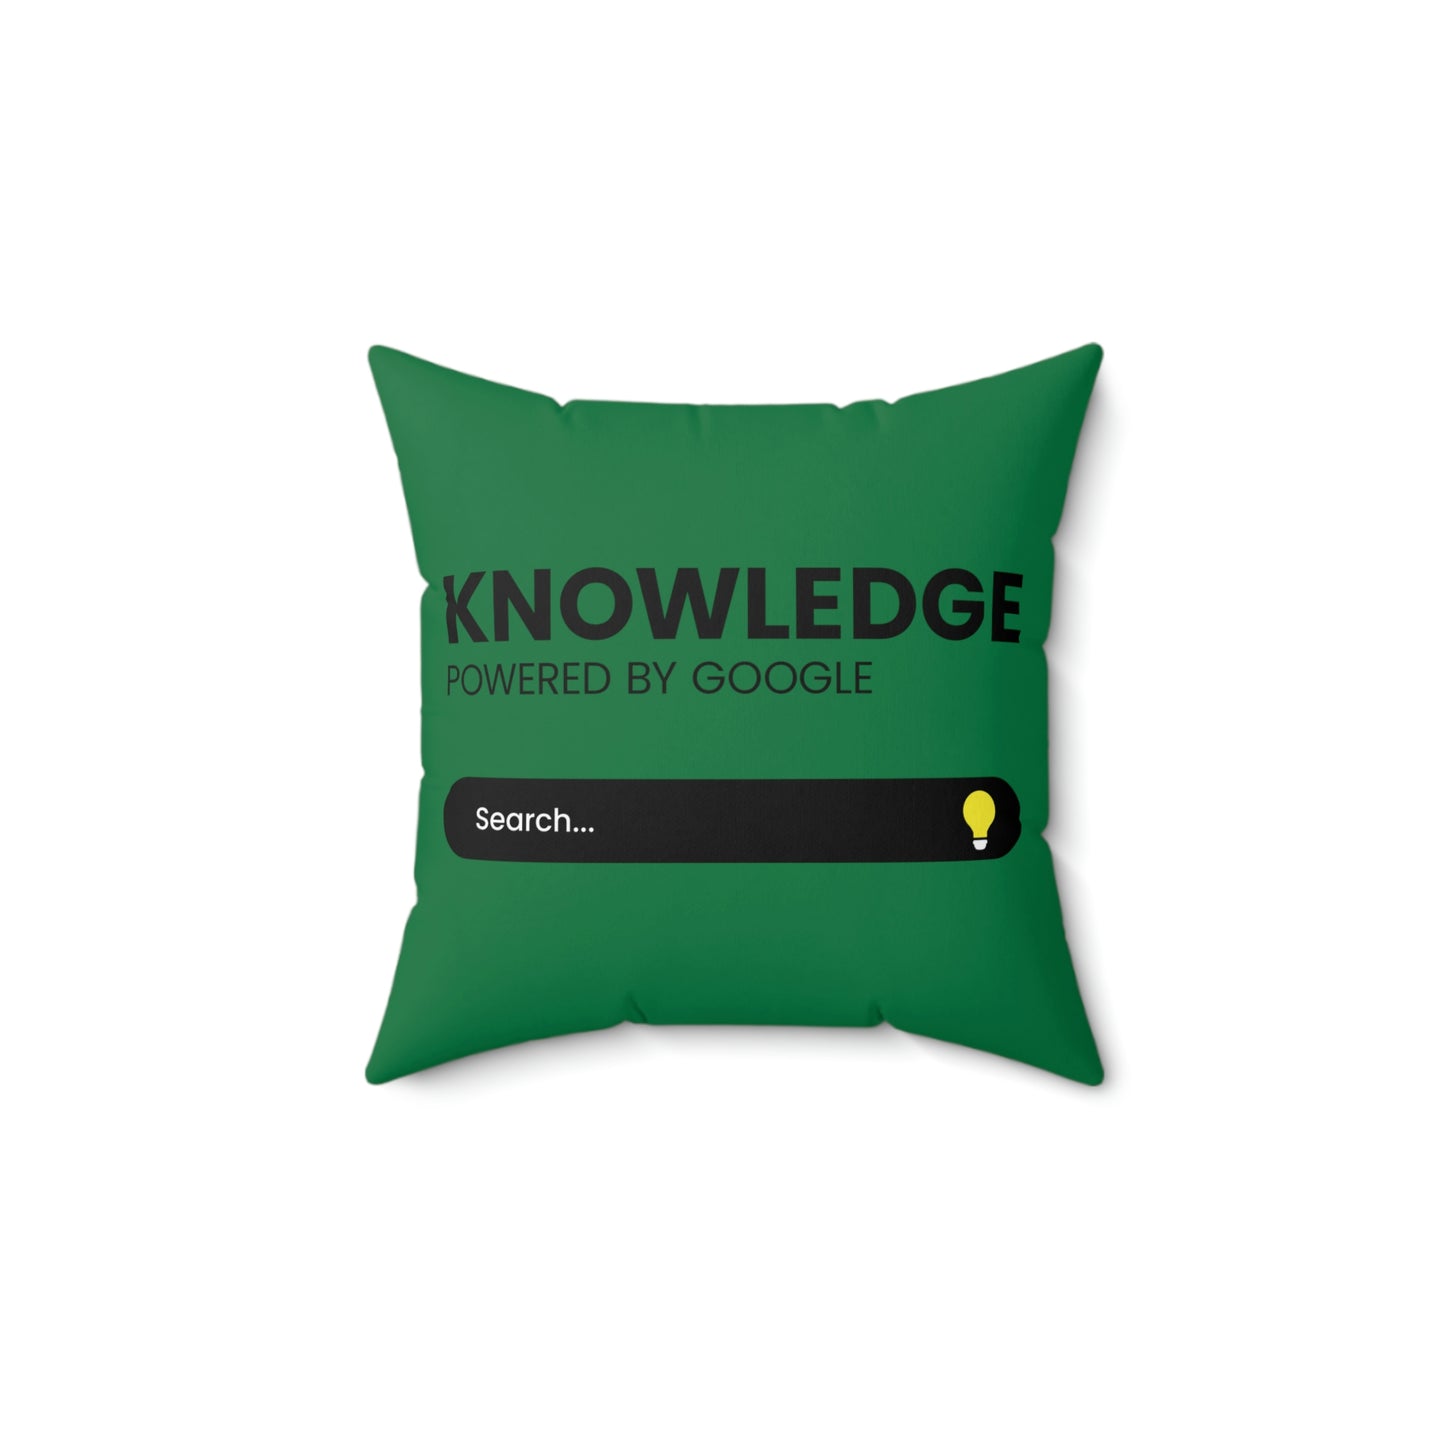 Spun Polyester Square Pillow Case “Knowledge Powered by Google on Dark Green”